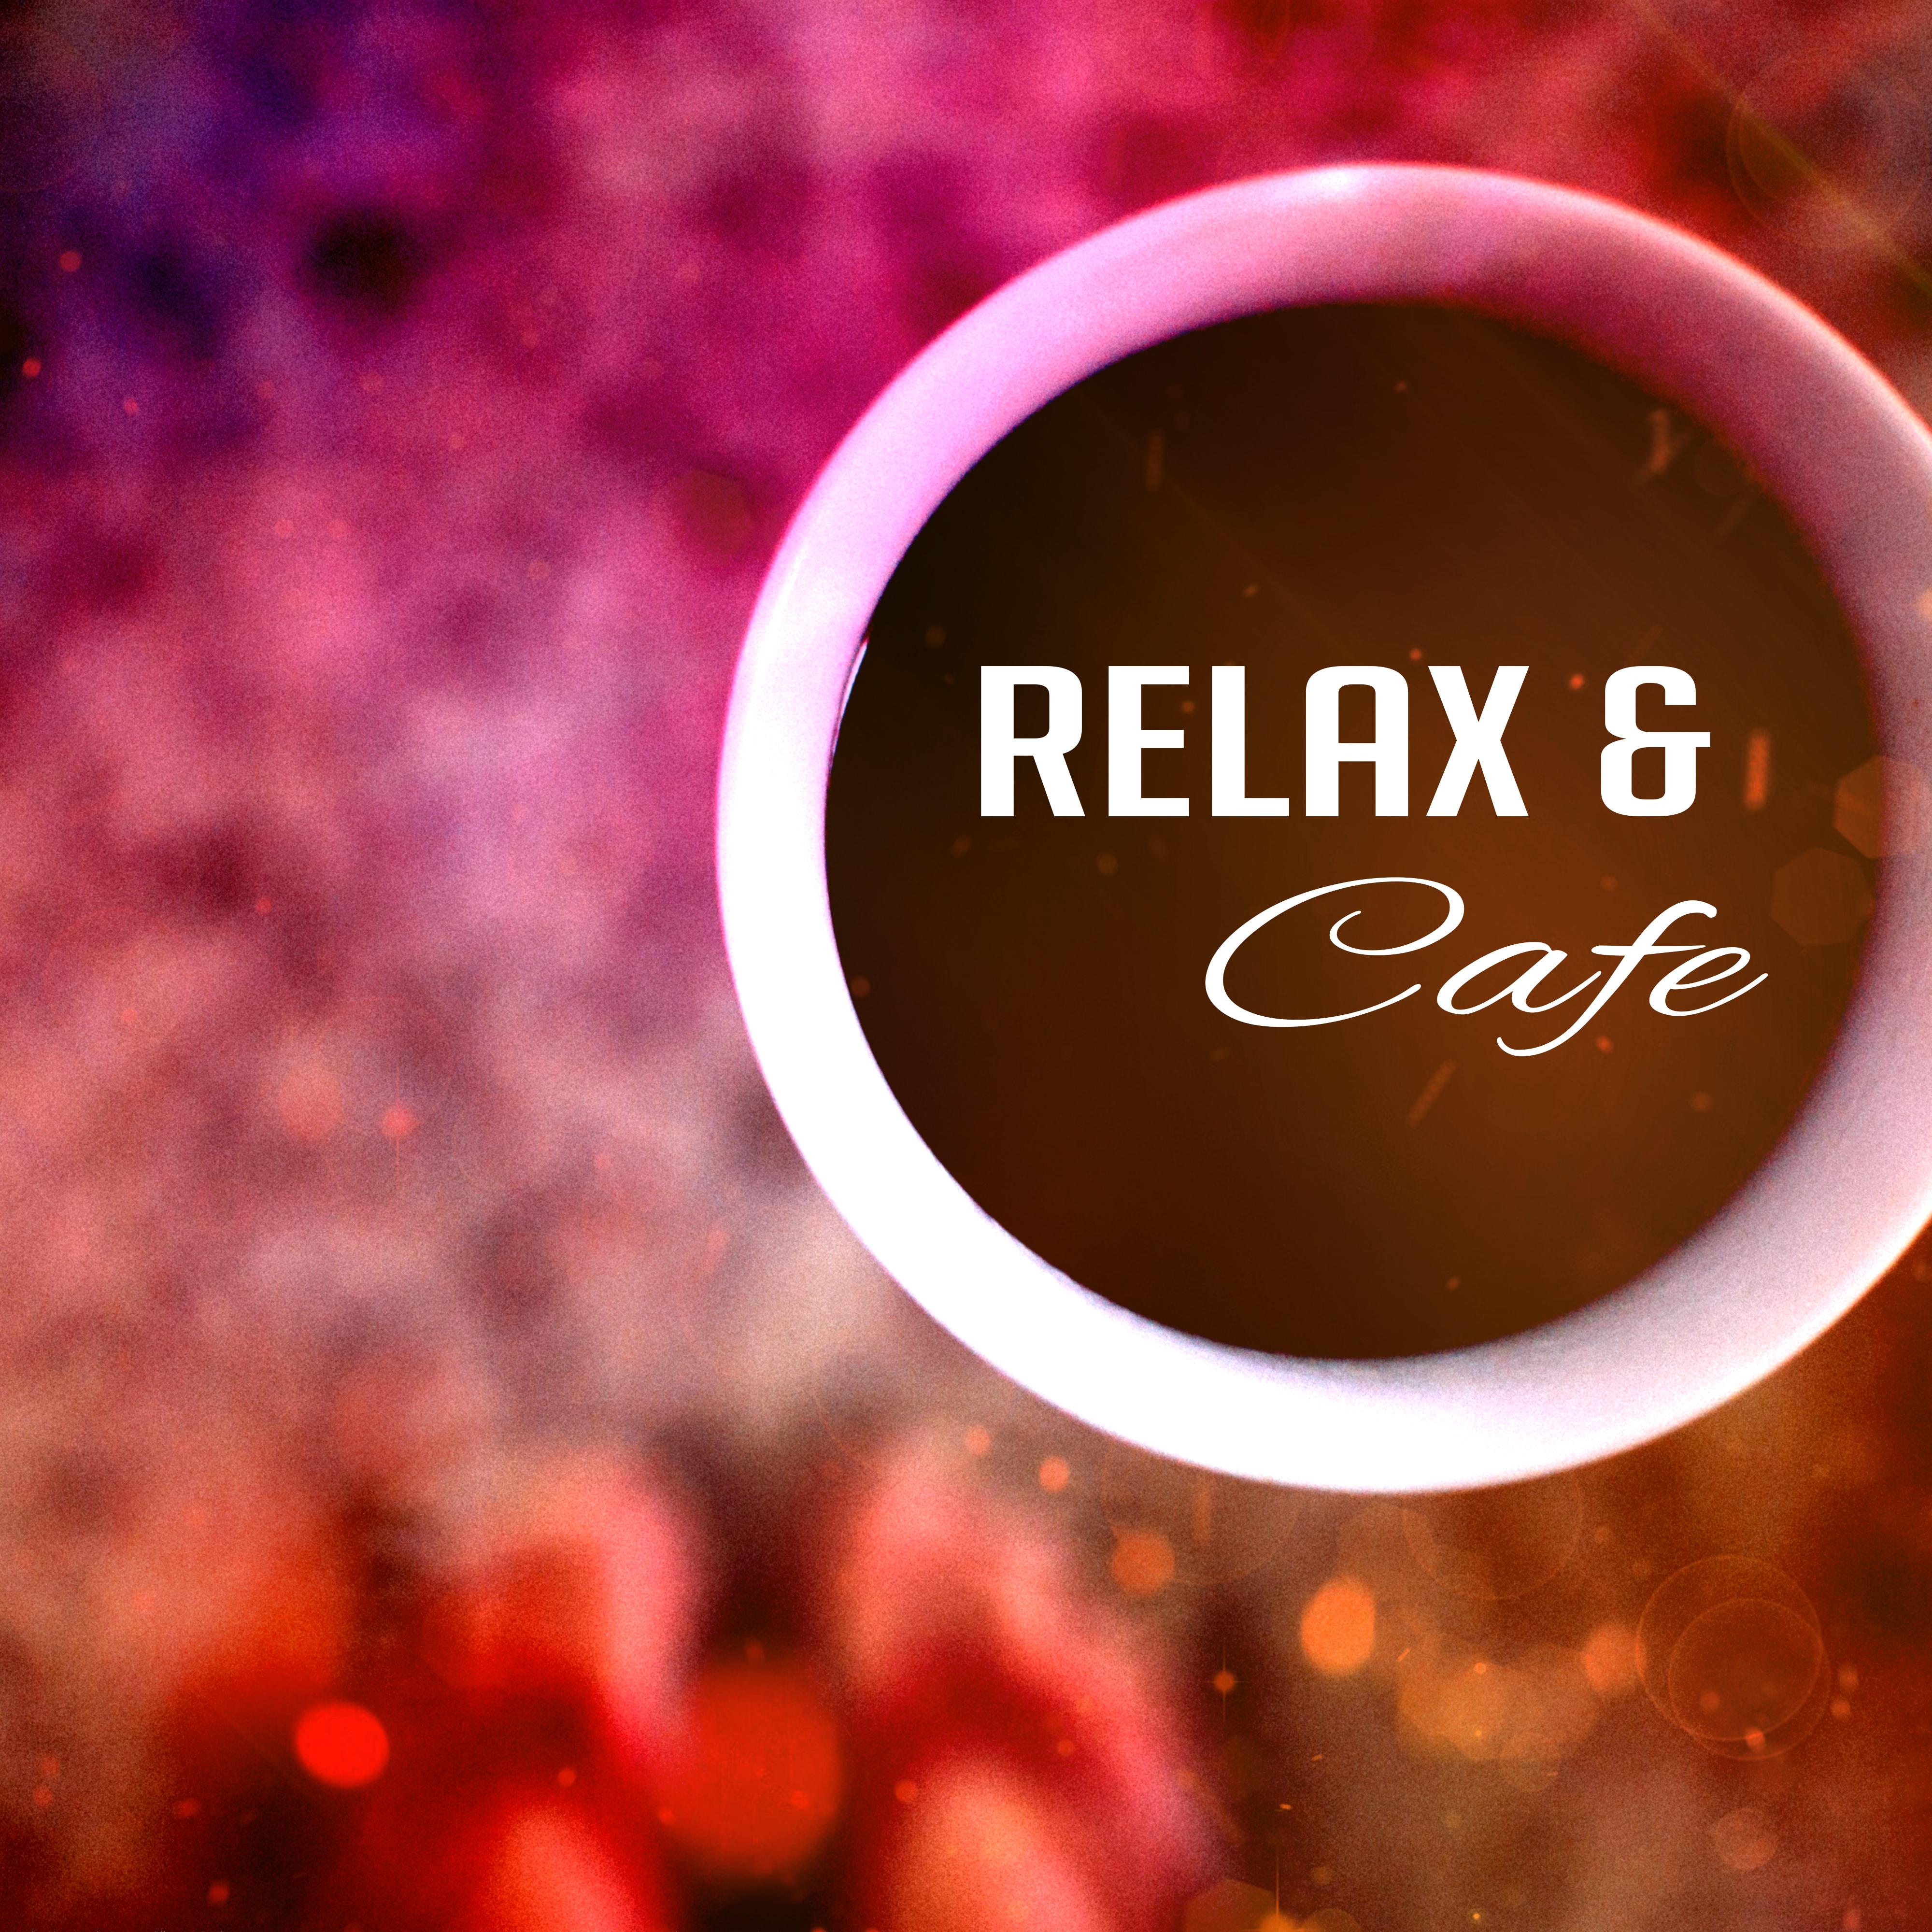 Relax  Cafe  Restaurant Music, Instrumental Music for Relaxation, Jazz Cafe, Ambient Piano Jazz Lounge, Cocktail Party, Smooth Jazz